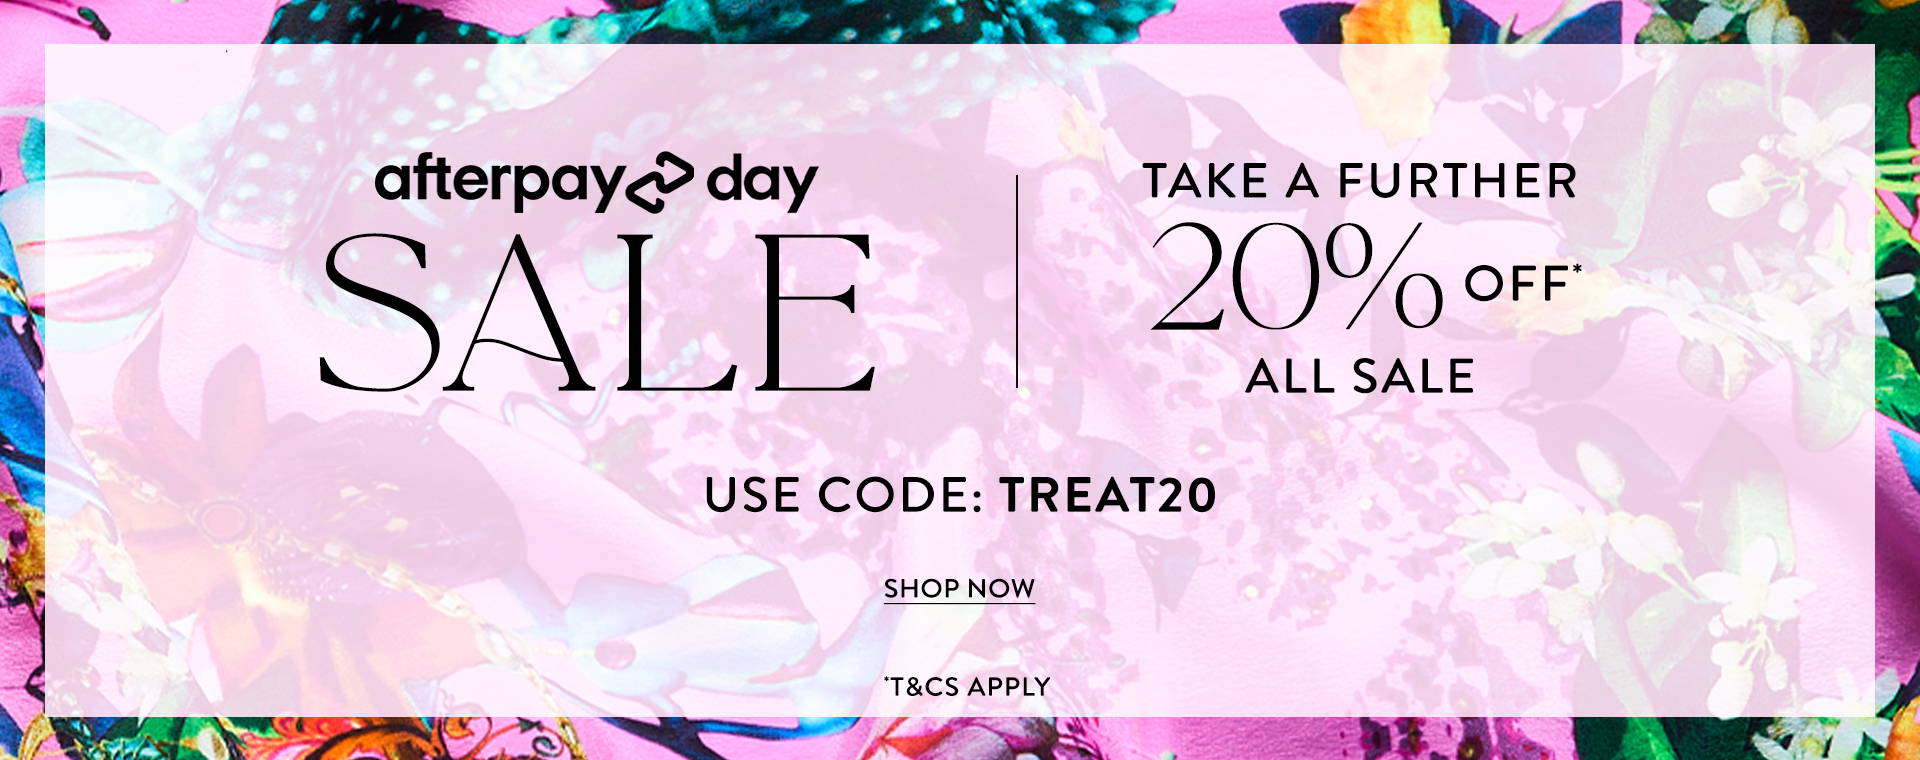 CAMILLA | AFTERPAY DAY SALE | 20% off sale | Use Code